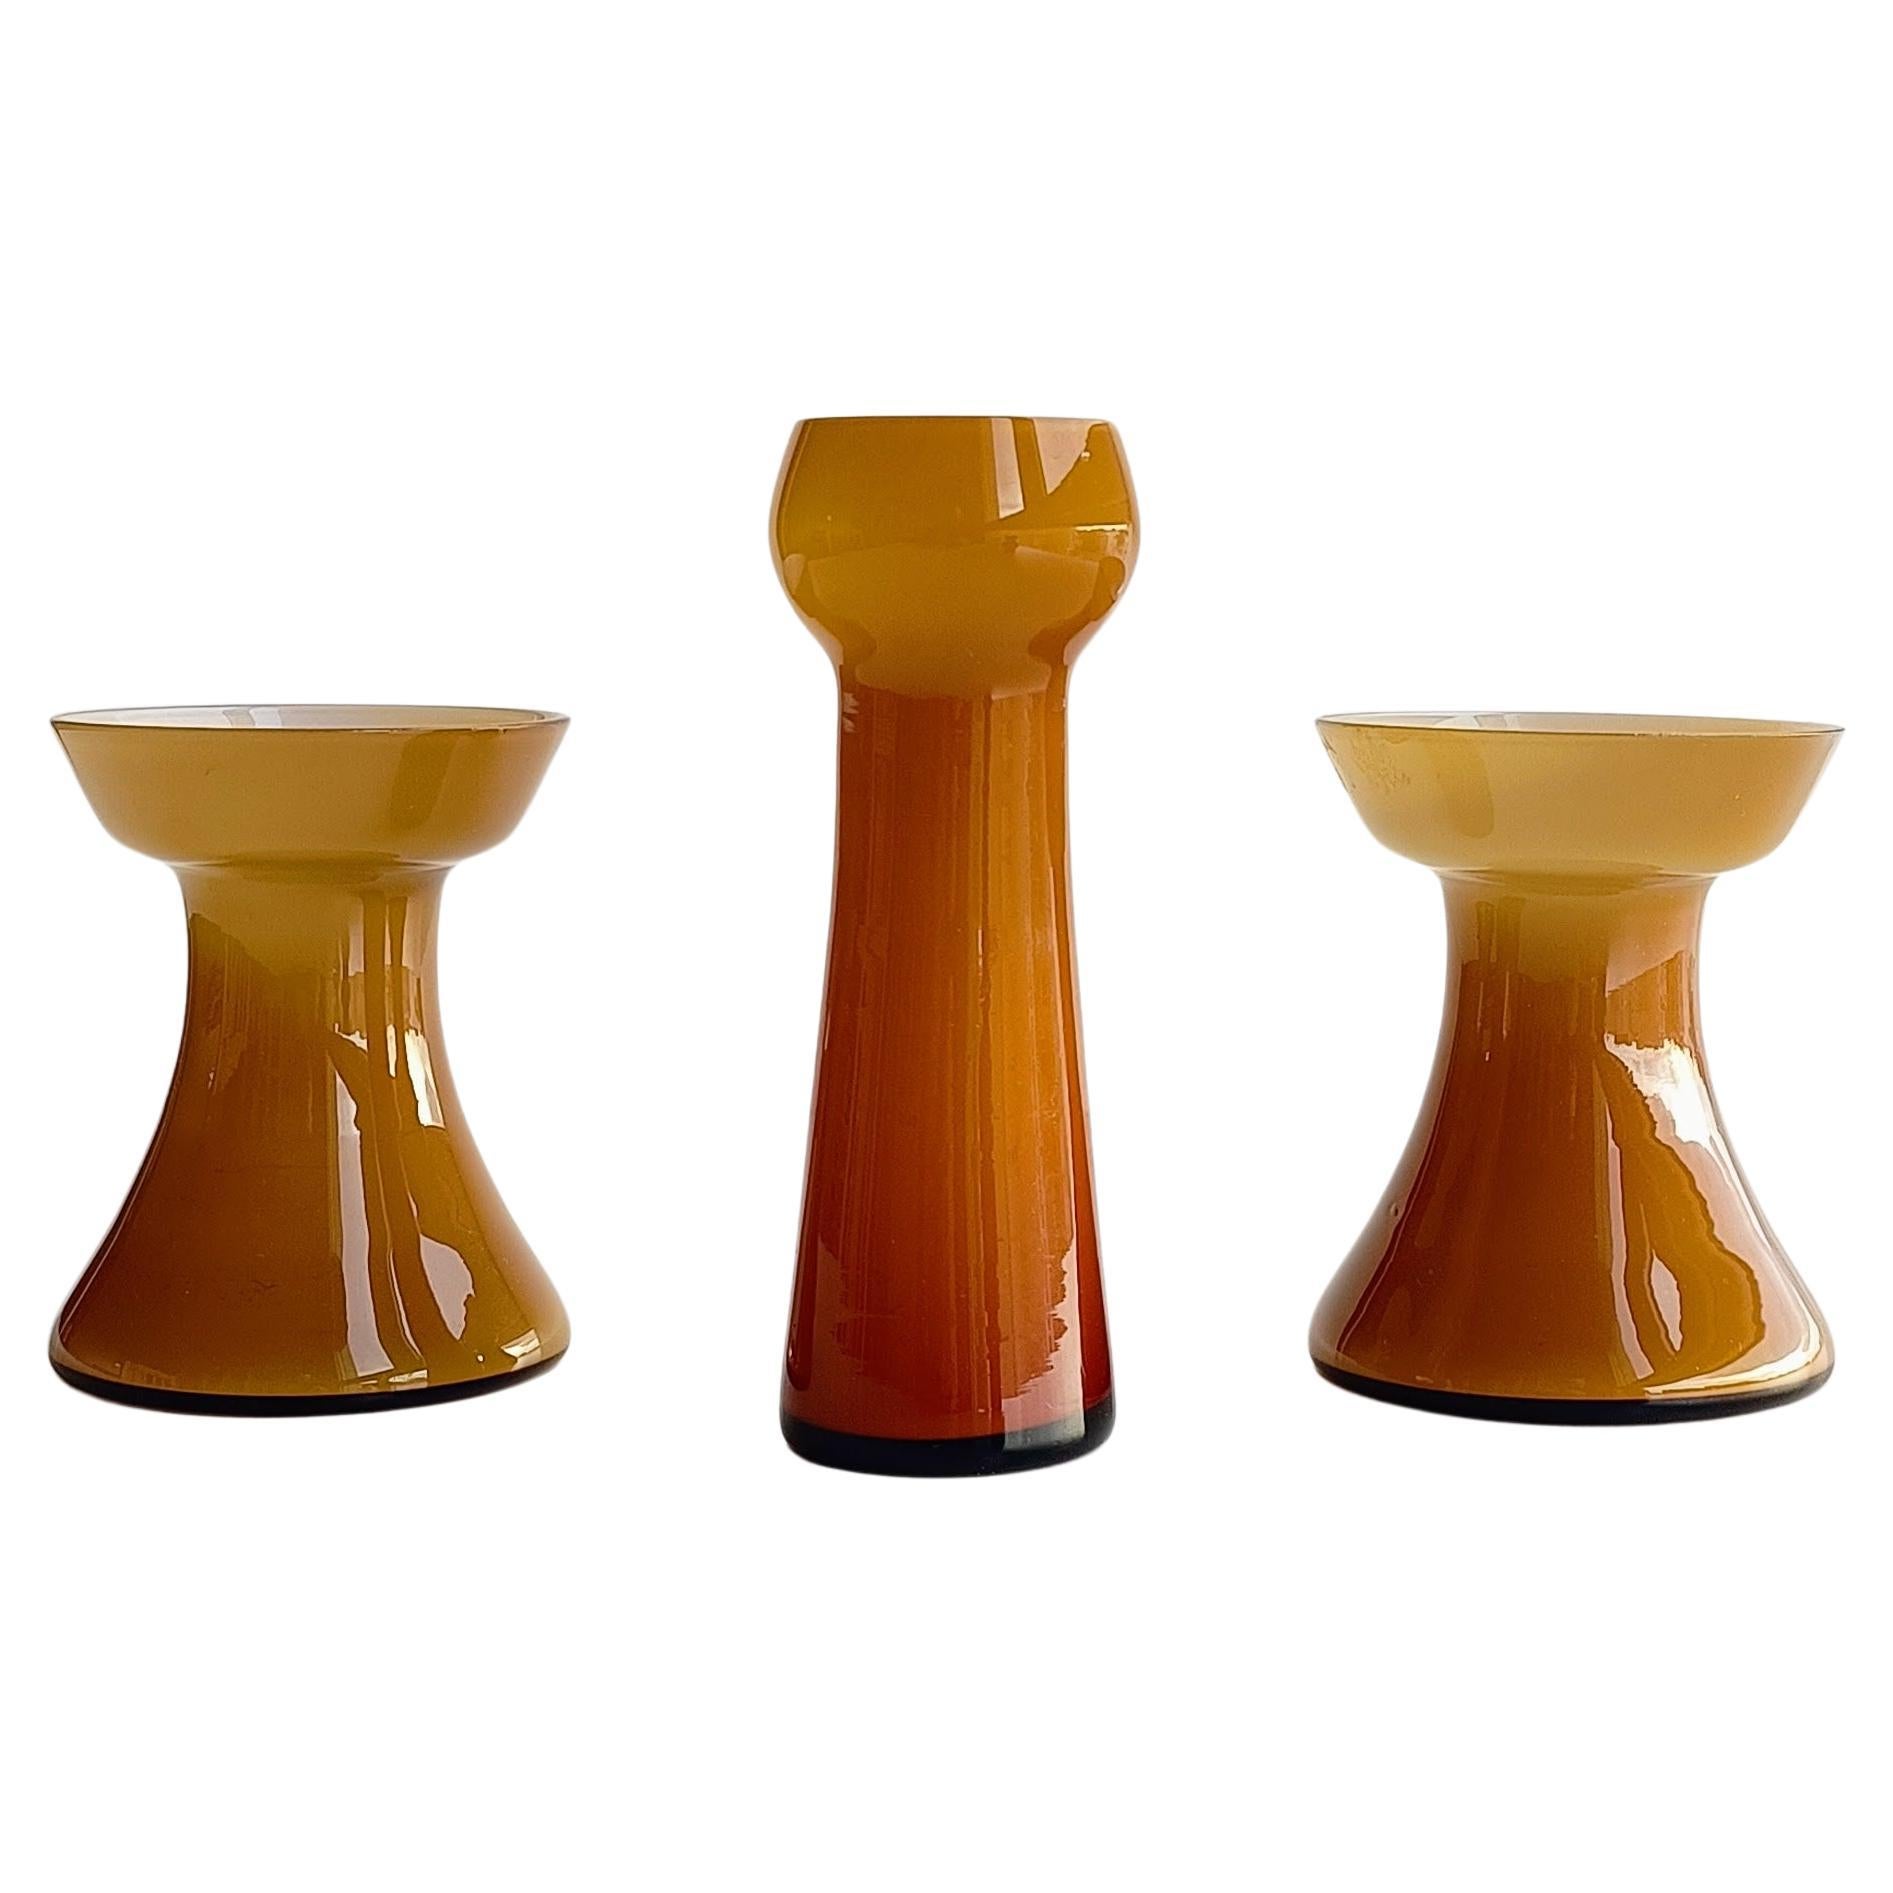 A set of three beautiful Scandinavian Modern amber cased glass candle holders by Per-Olof Ström for Alsterfors Glass. Handblown in Sweden, circa the 1950s.

Per-Olof Ström was a Swedish glass designer known for his work during the mid-20th century.